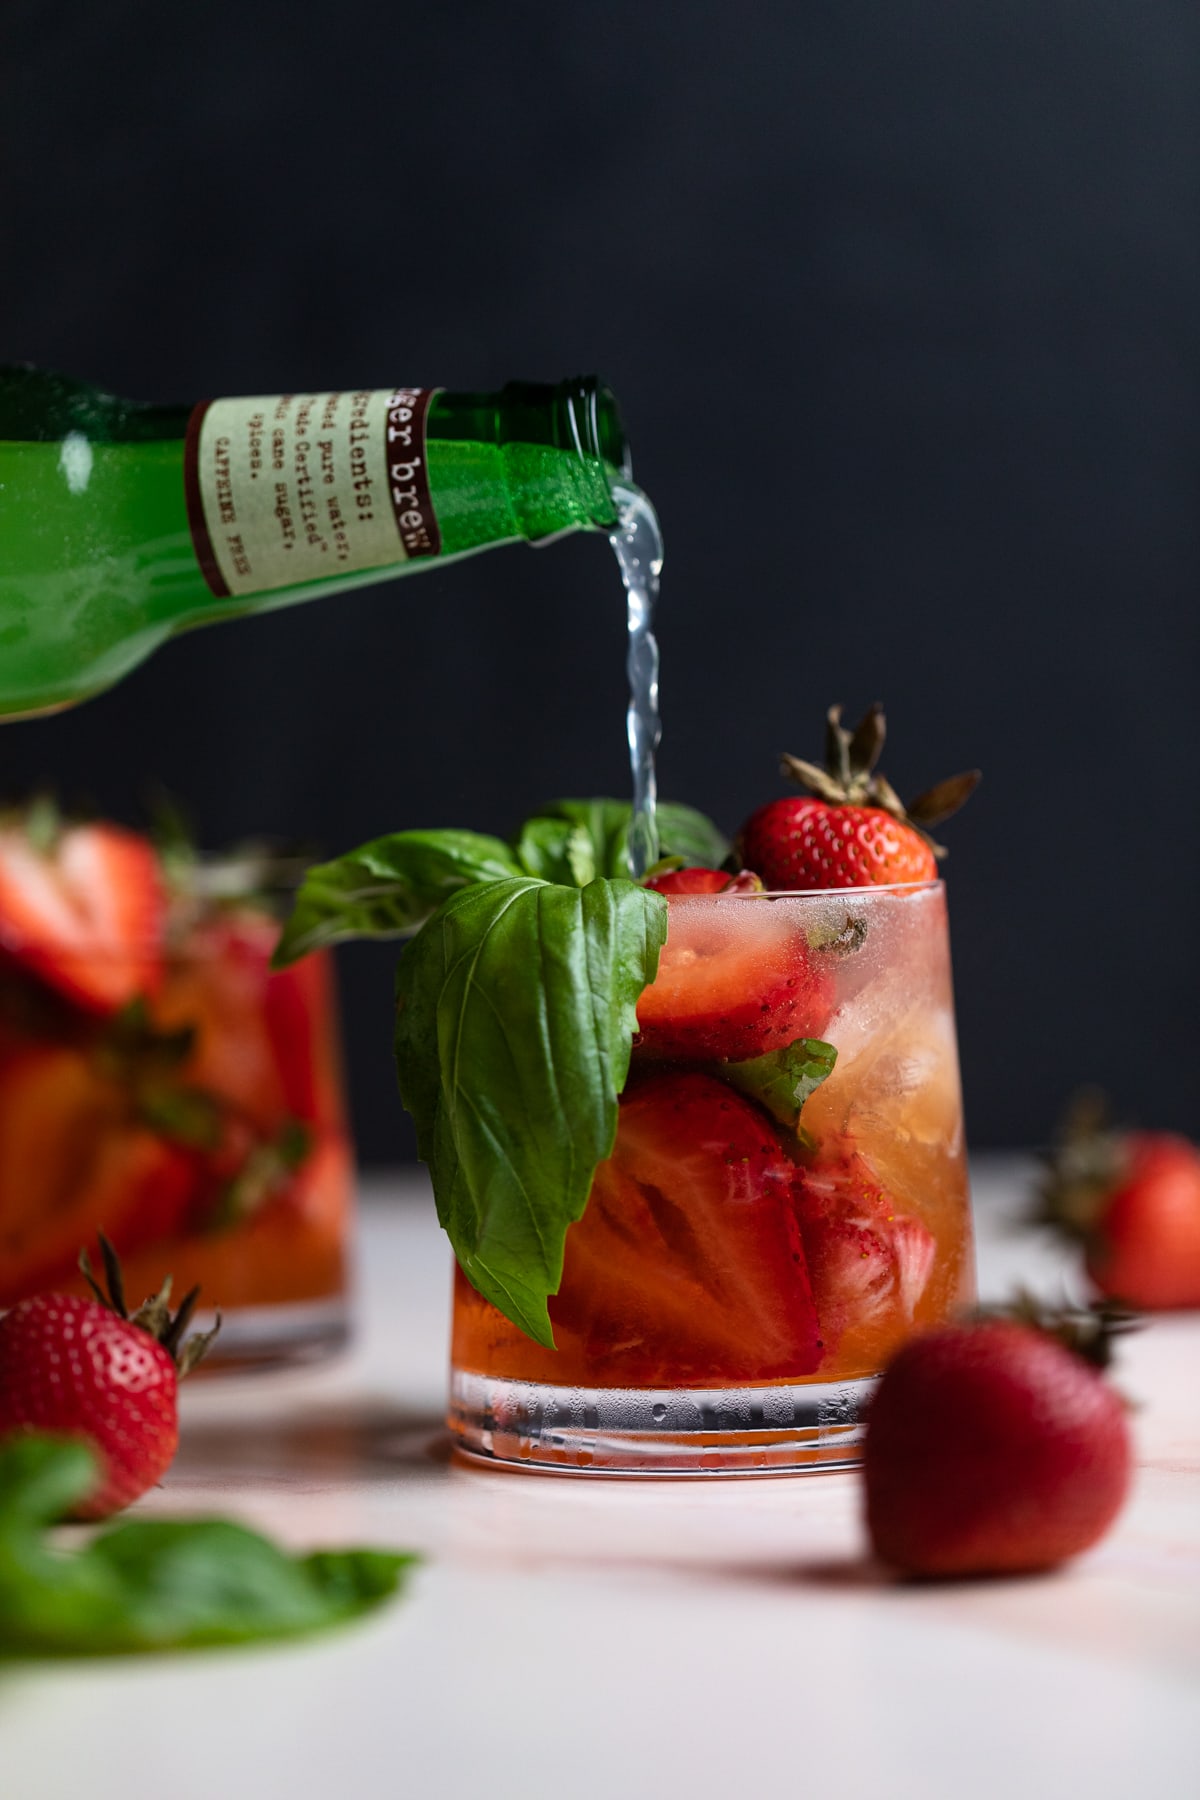 Ginger beer pouting into a Strawberry Basil Pineapple Mocktail.